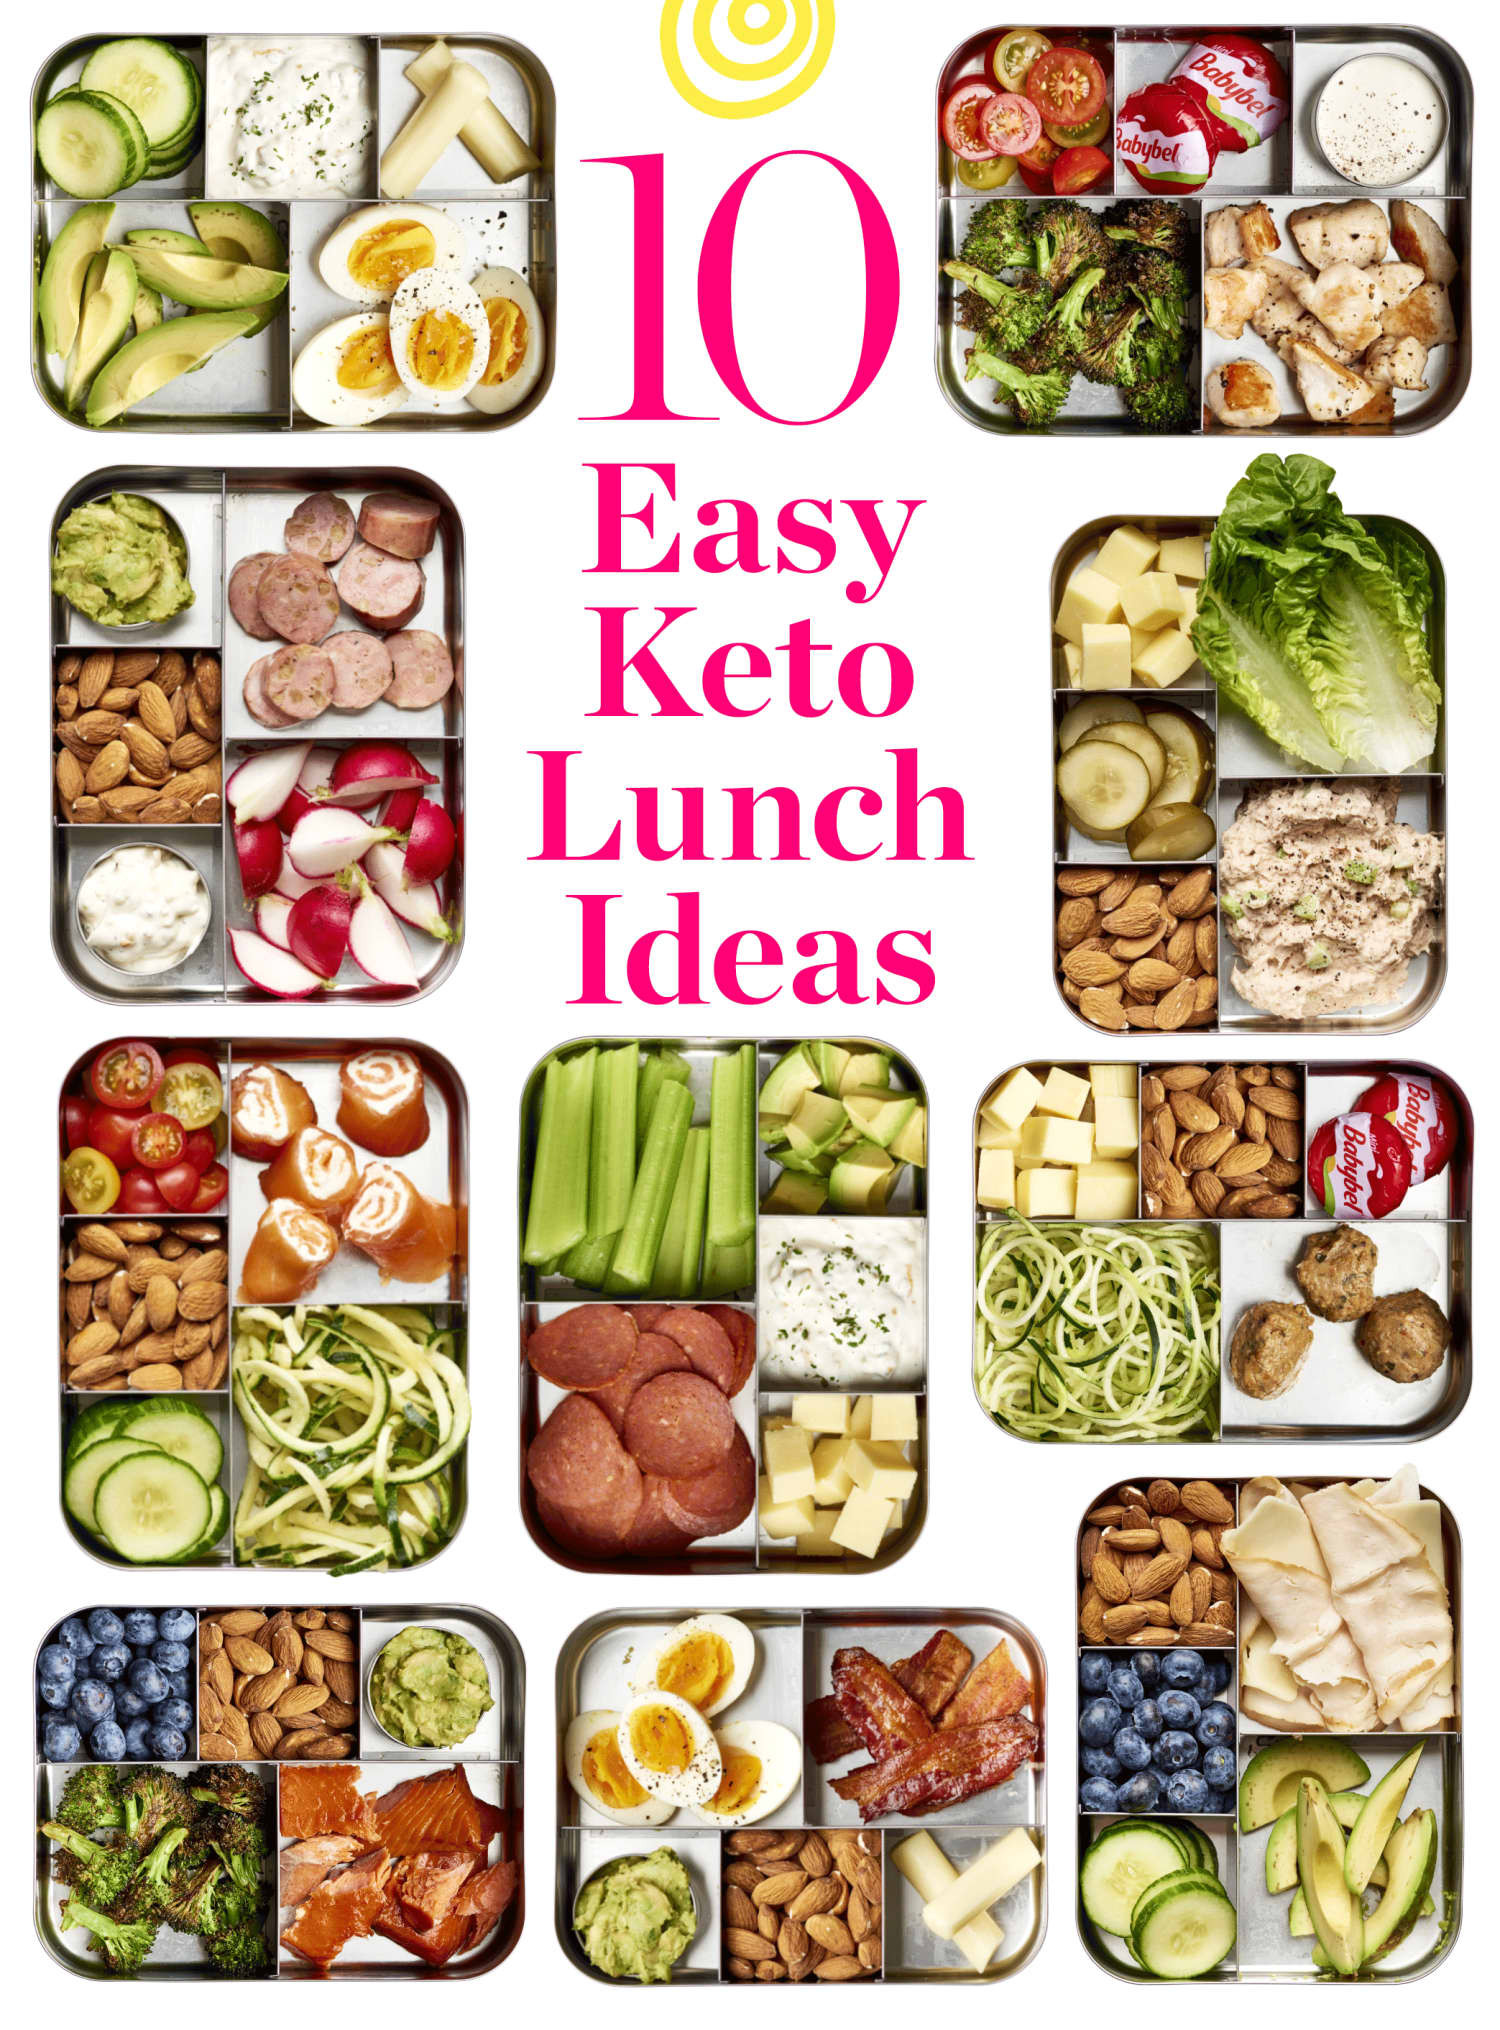 Easy Keto Lunches For Work
 10 Easy Keto Lunch Ideas with Net Carb Counts